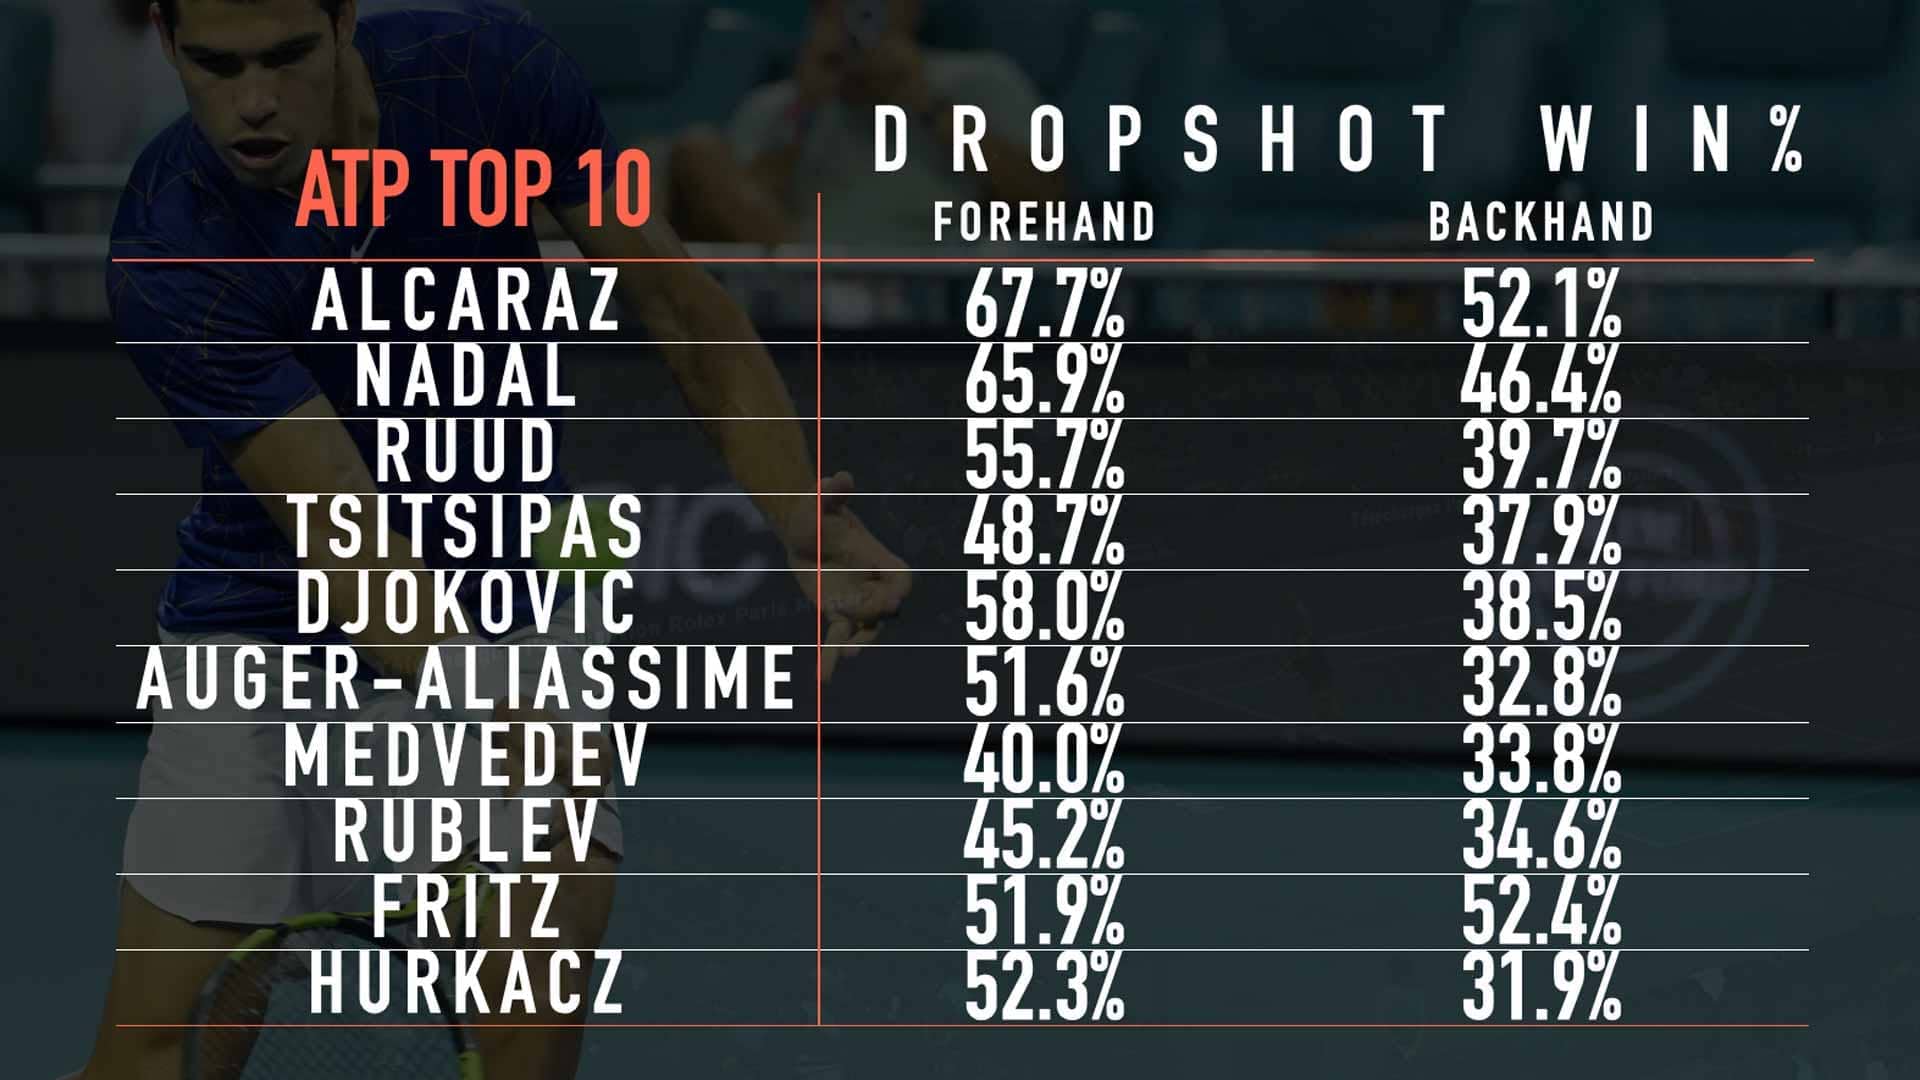 Forehand and Backhand drop shot Win % for Players in the ATP Top 10.